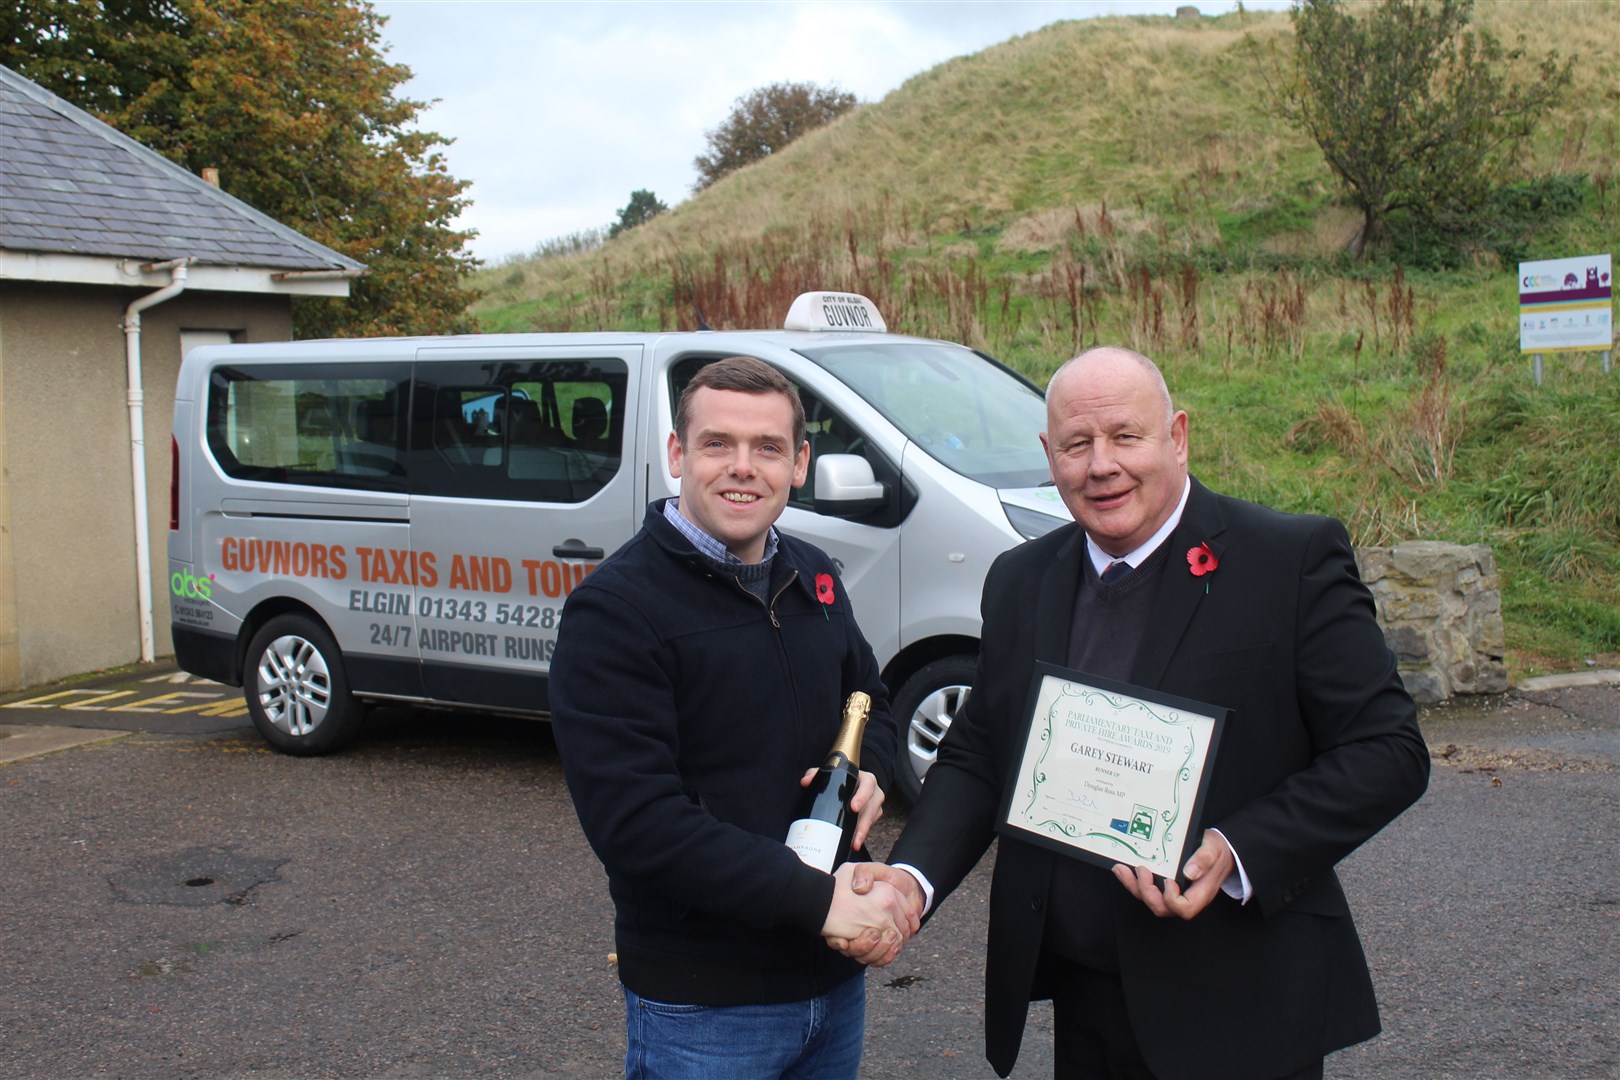 Elgin Taxi driver Garey Stewart, who owns Guvnor's Taxis, was presented with his award by Moray MP Douglas Ross.